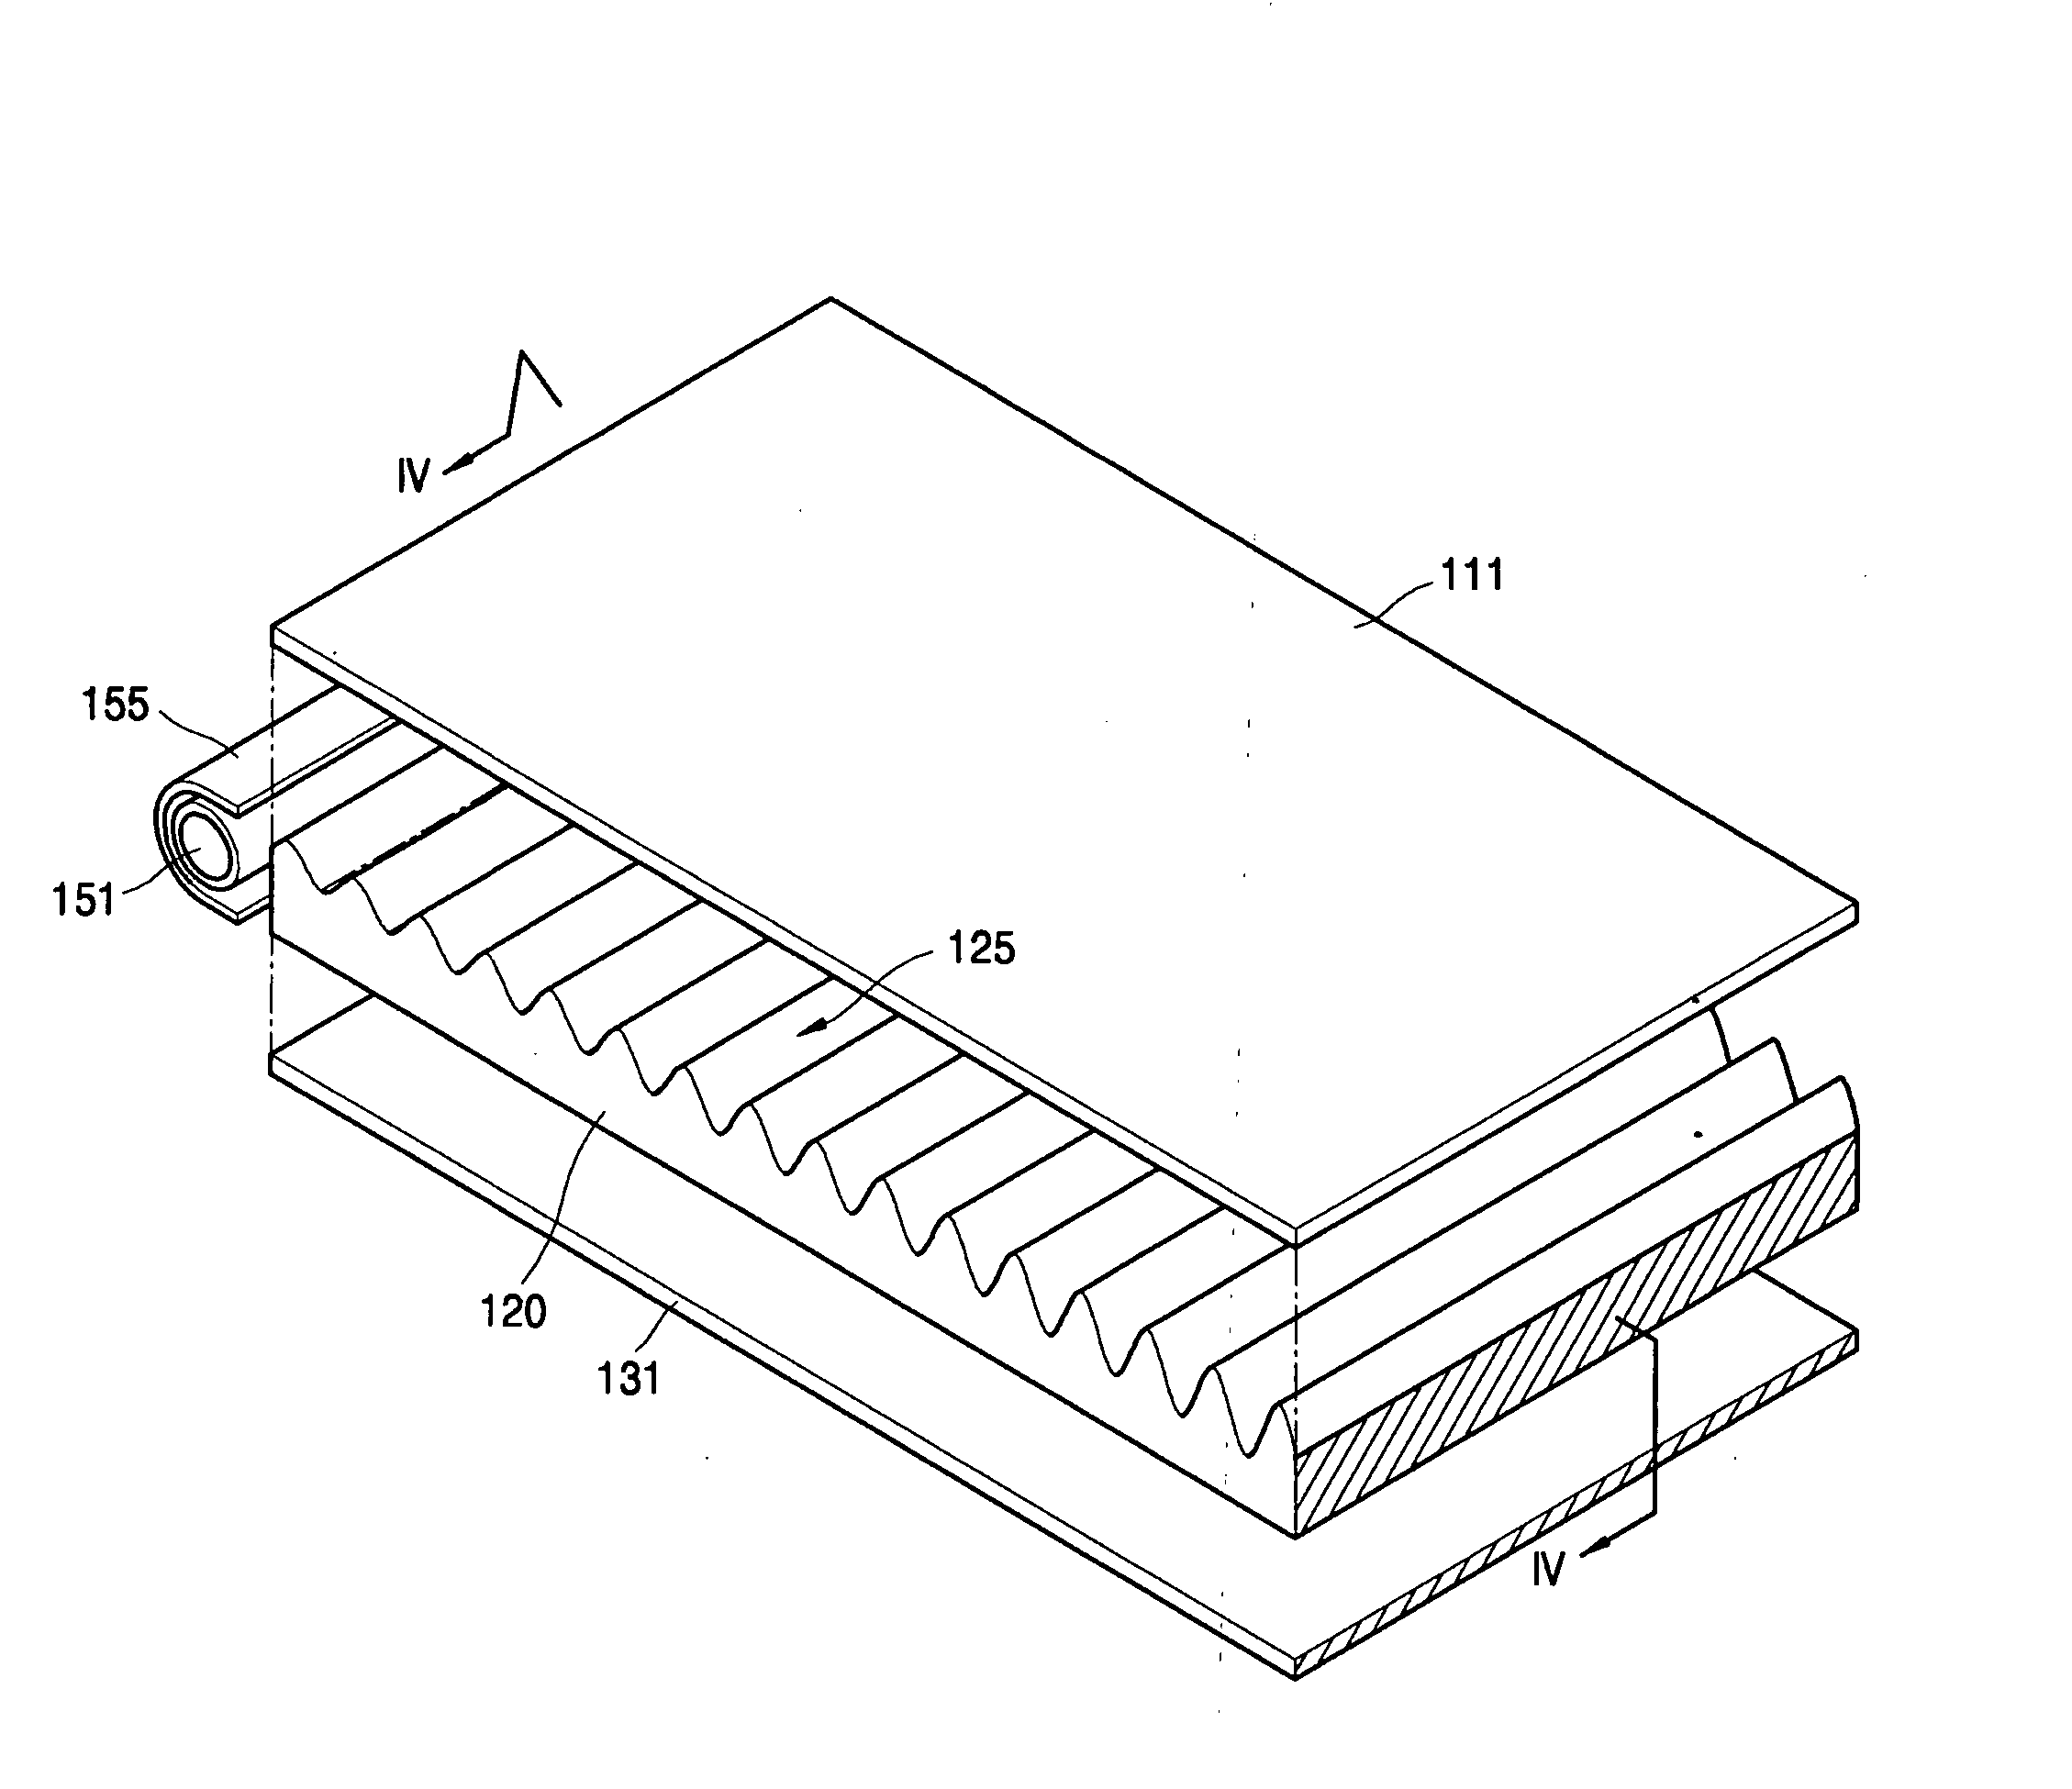 Backlight unit for flat panel display and flat panel display apparatus having the same